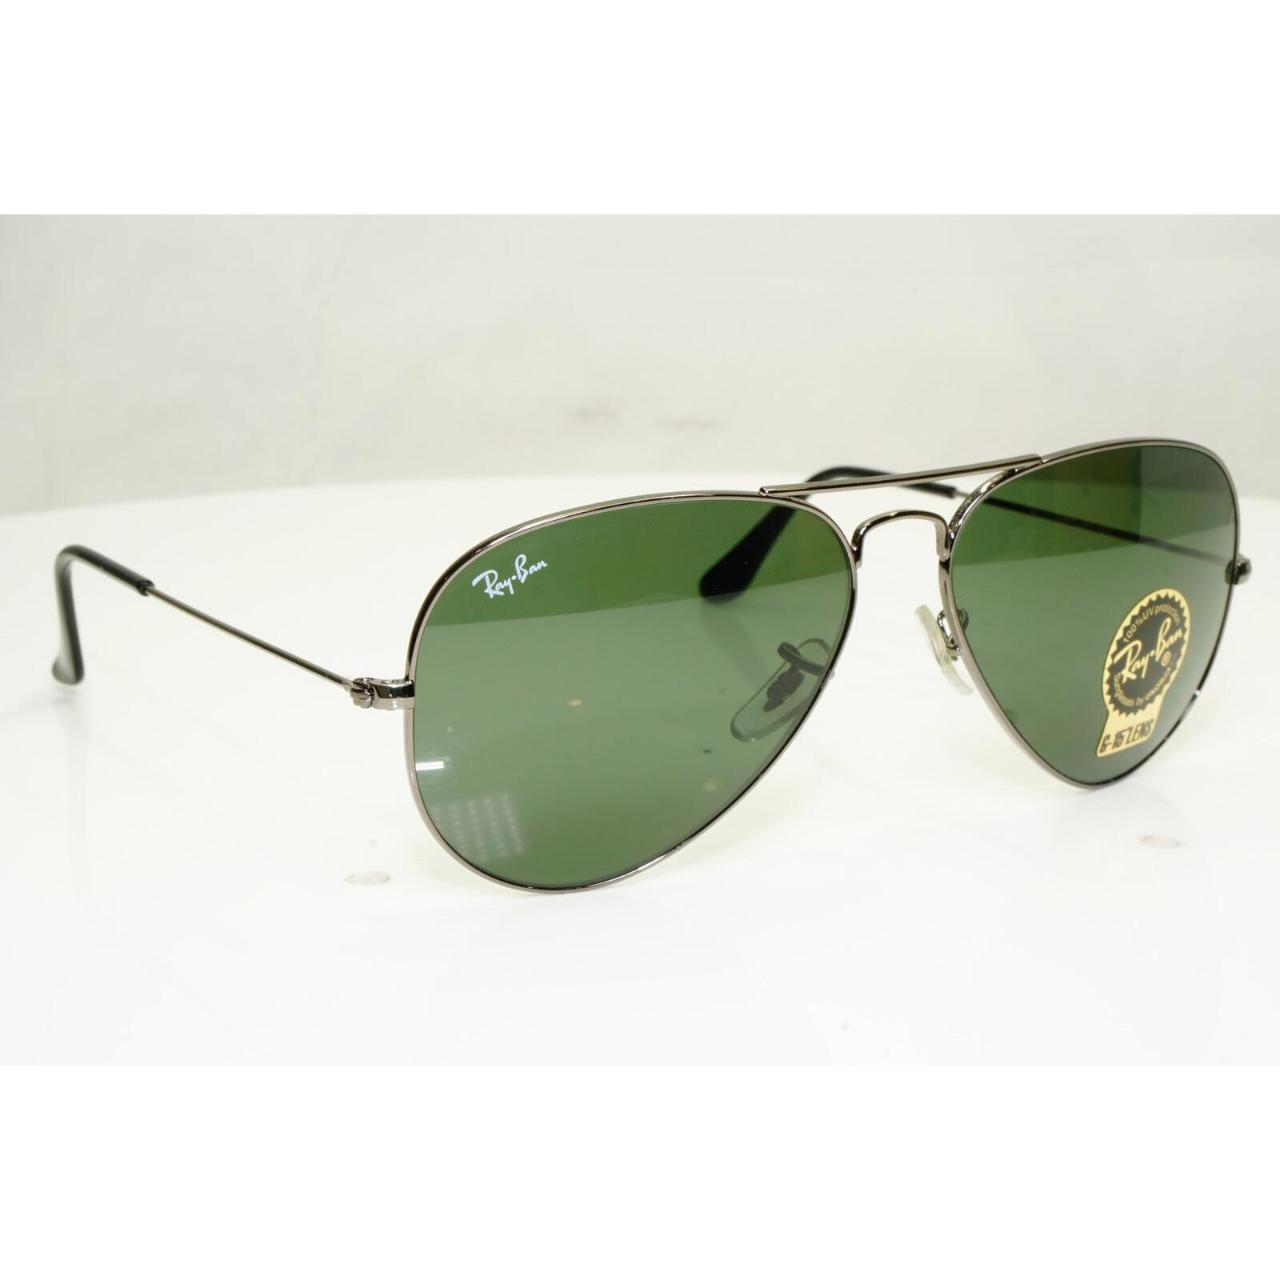 Authentic Ray-Ban Mens Vintage Sunglasses RB 3025... - Depop